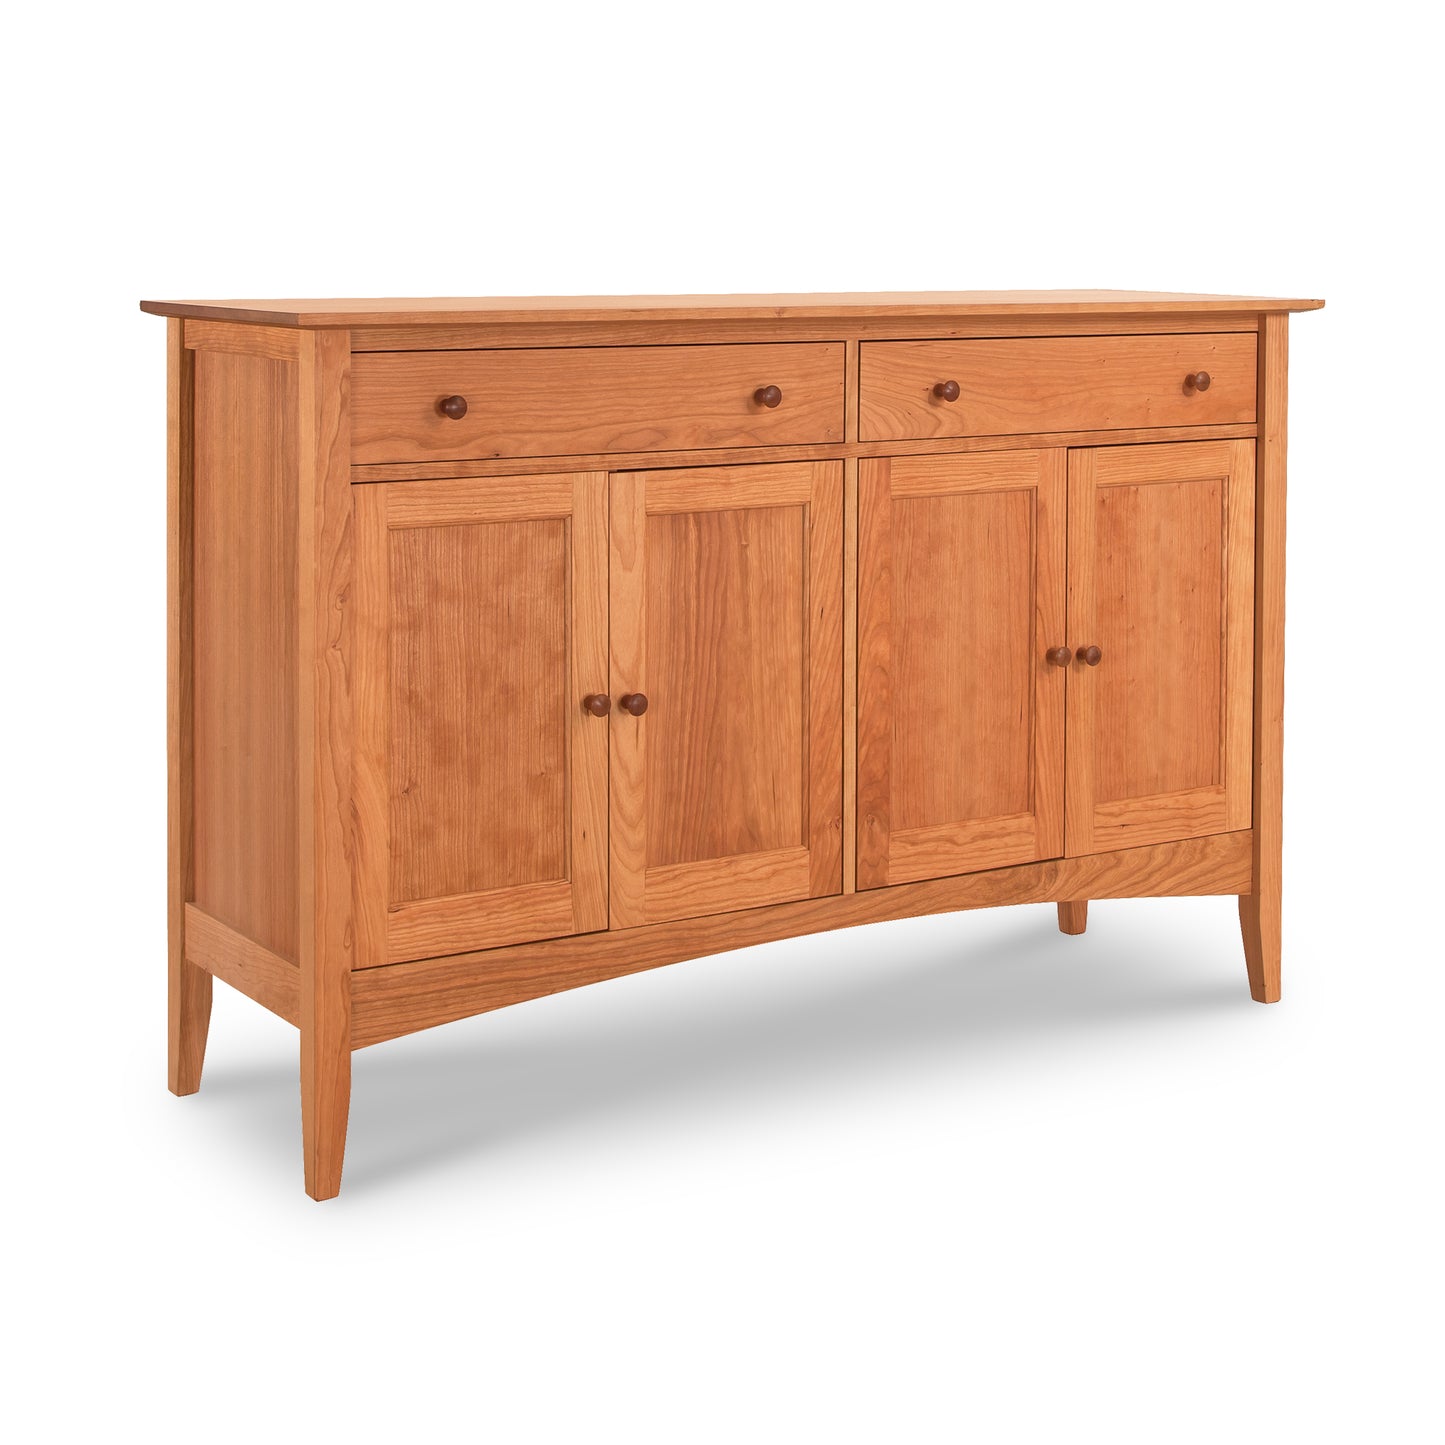 The Maple Corner Woodworks American Shaker Sideboard showcases Vermont craftsmanship with its solid hardwood construction. It features two doors and two drawers for ample storage space.